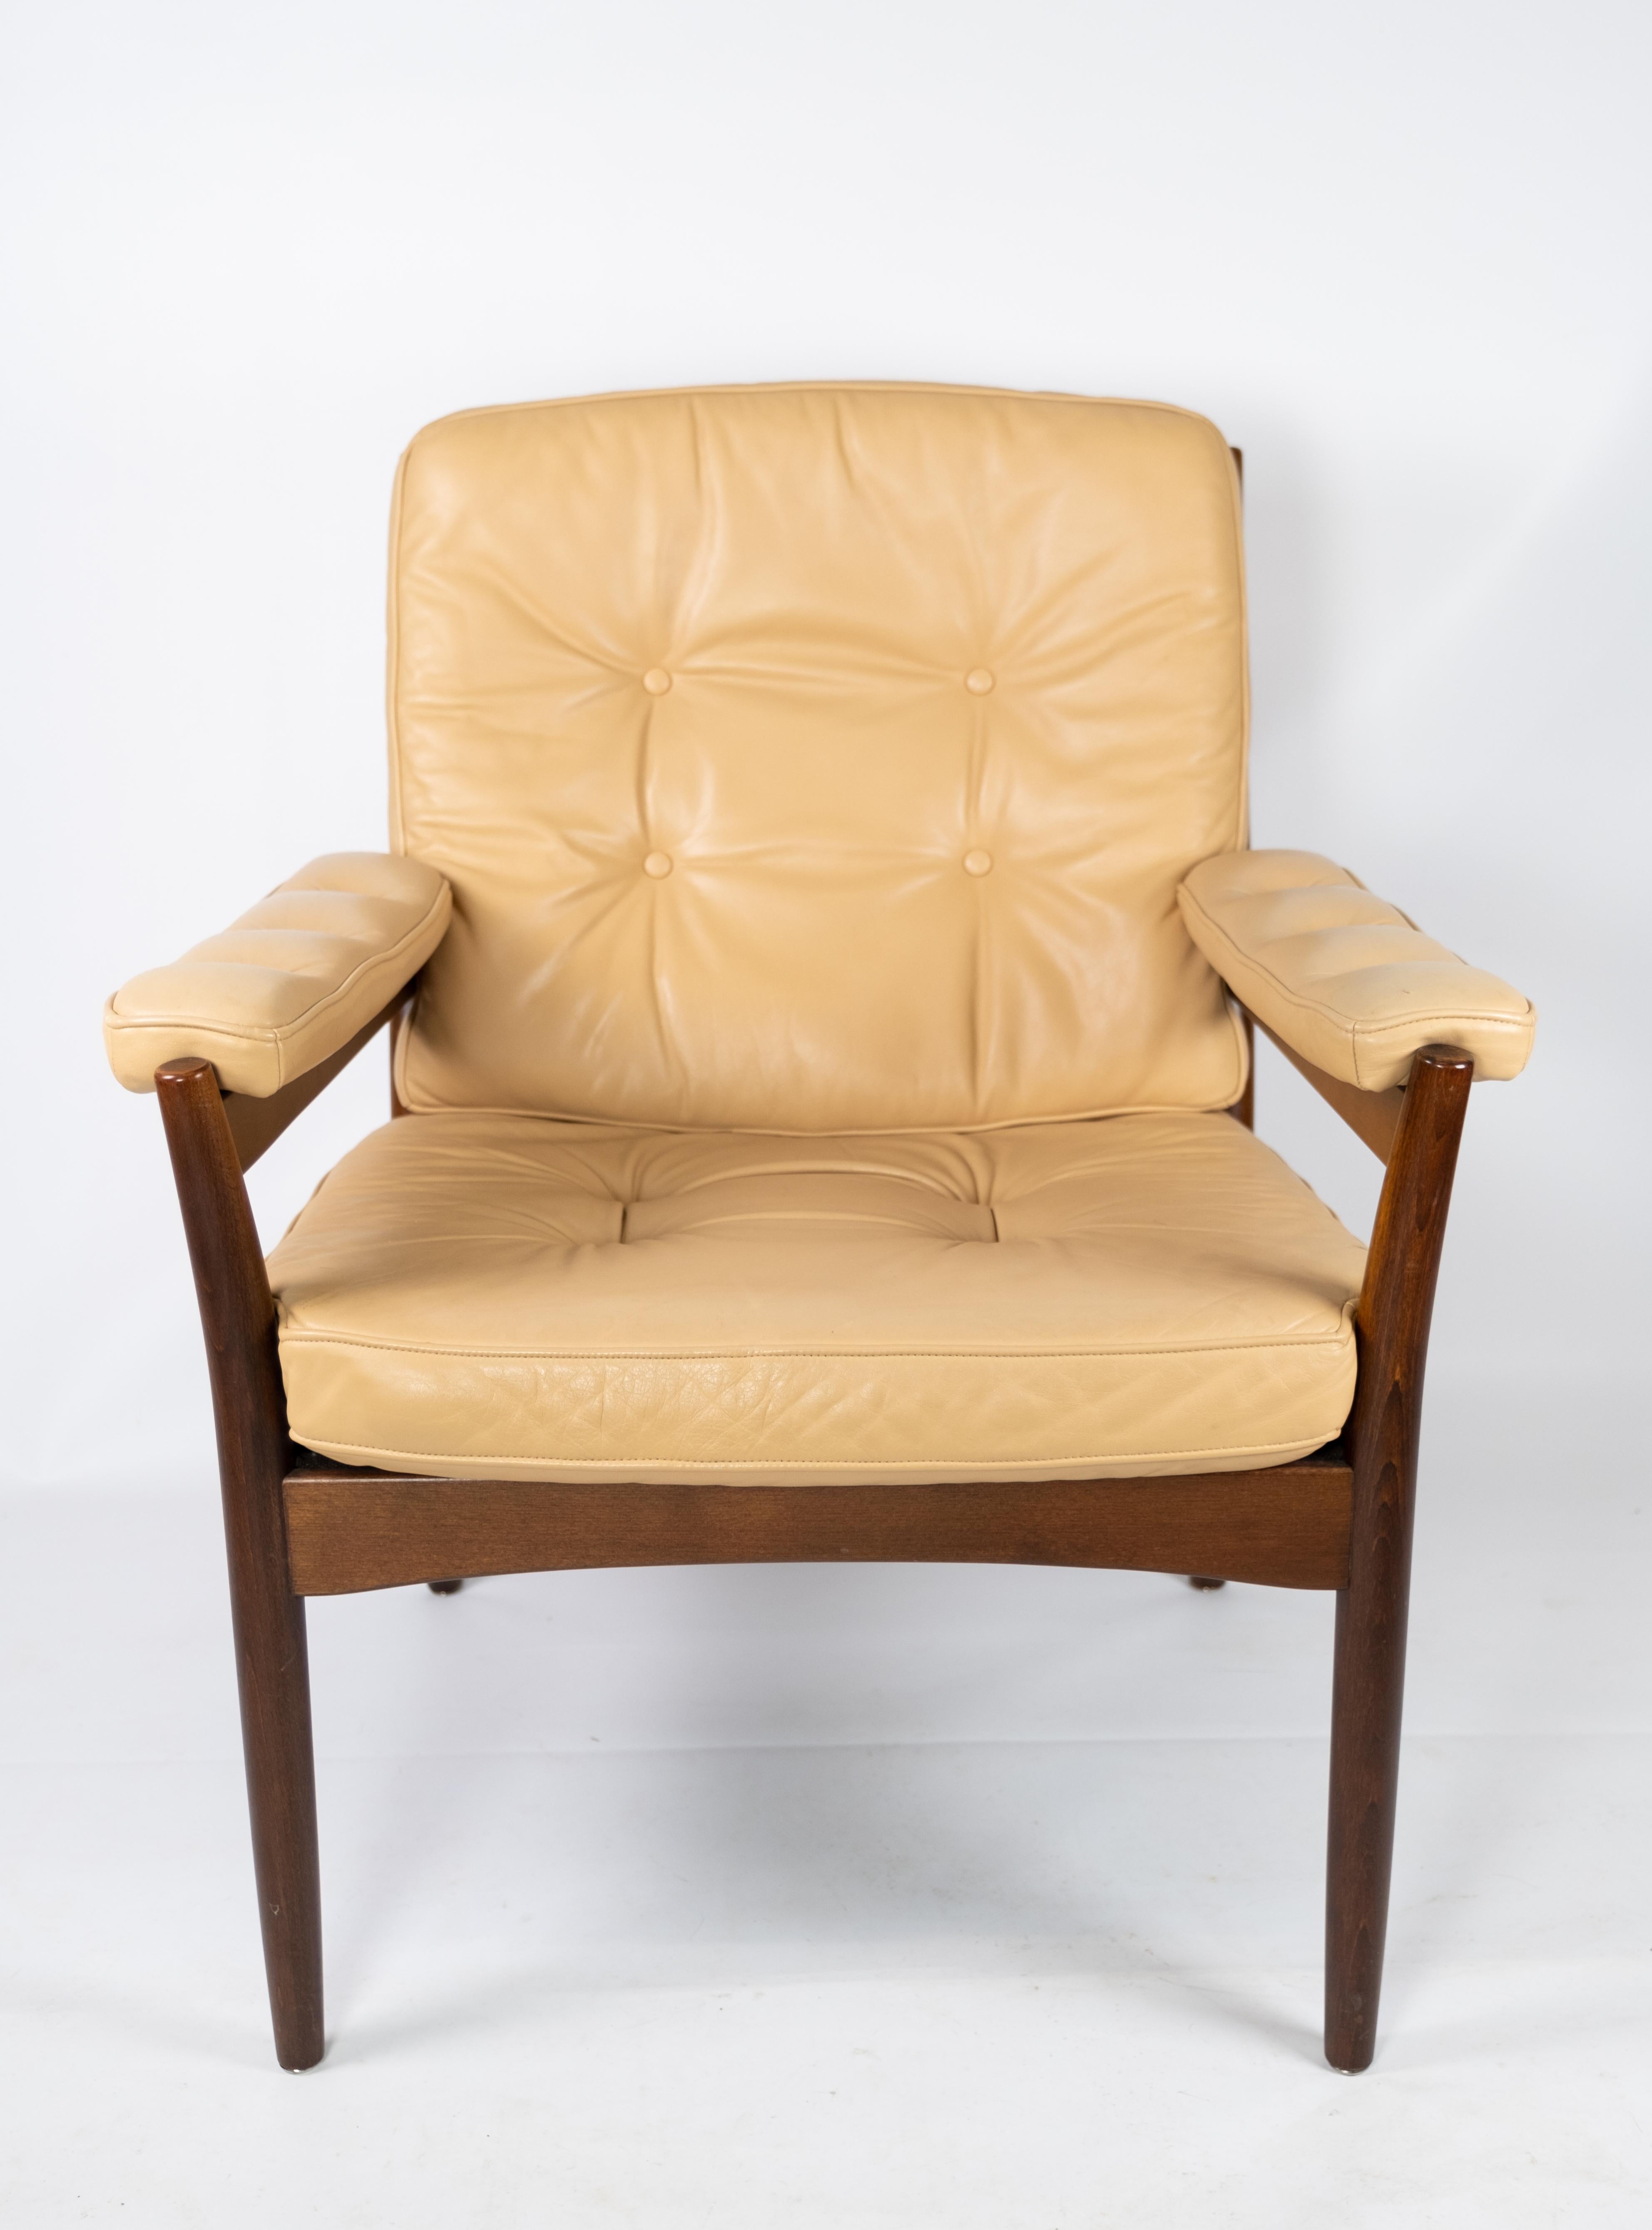 Armchair in dark wood and upholstered with light elegance leather of Danish design from the 1960s.The chair is in great vintage condition.